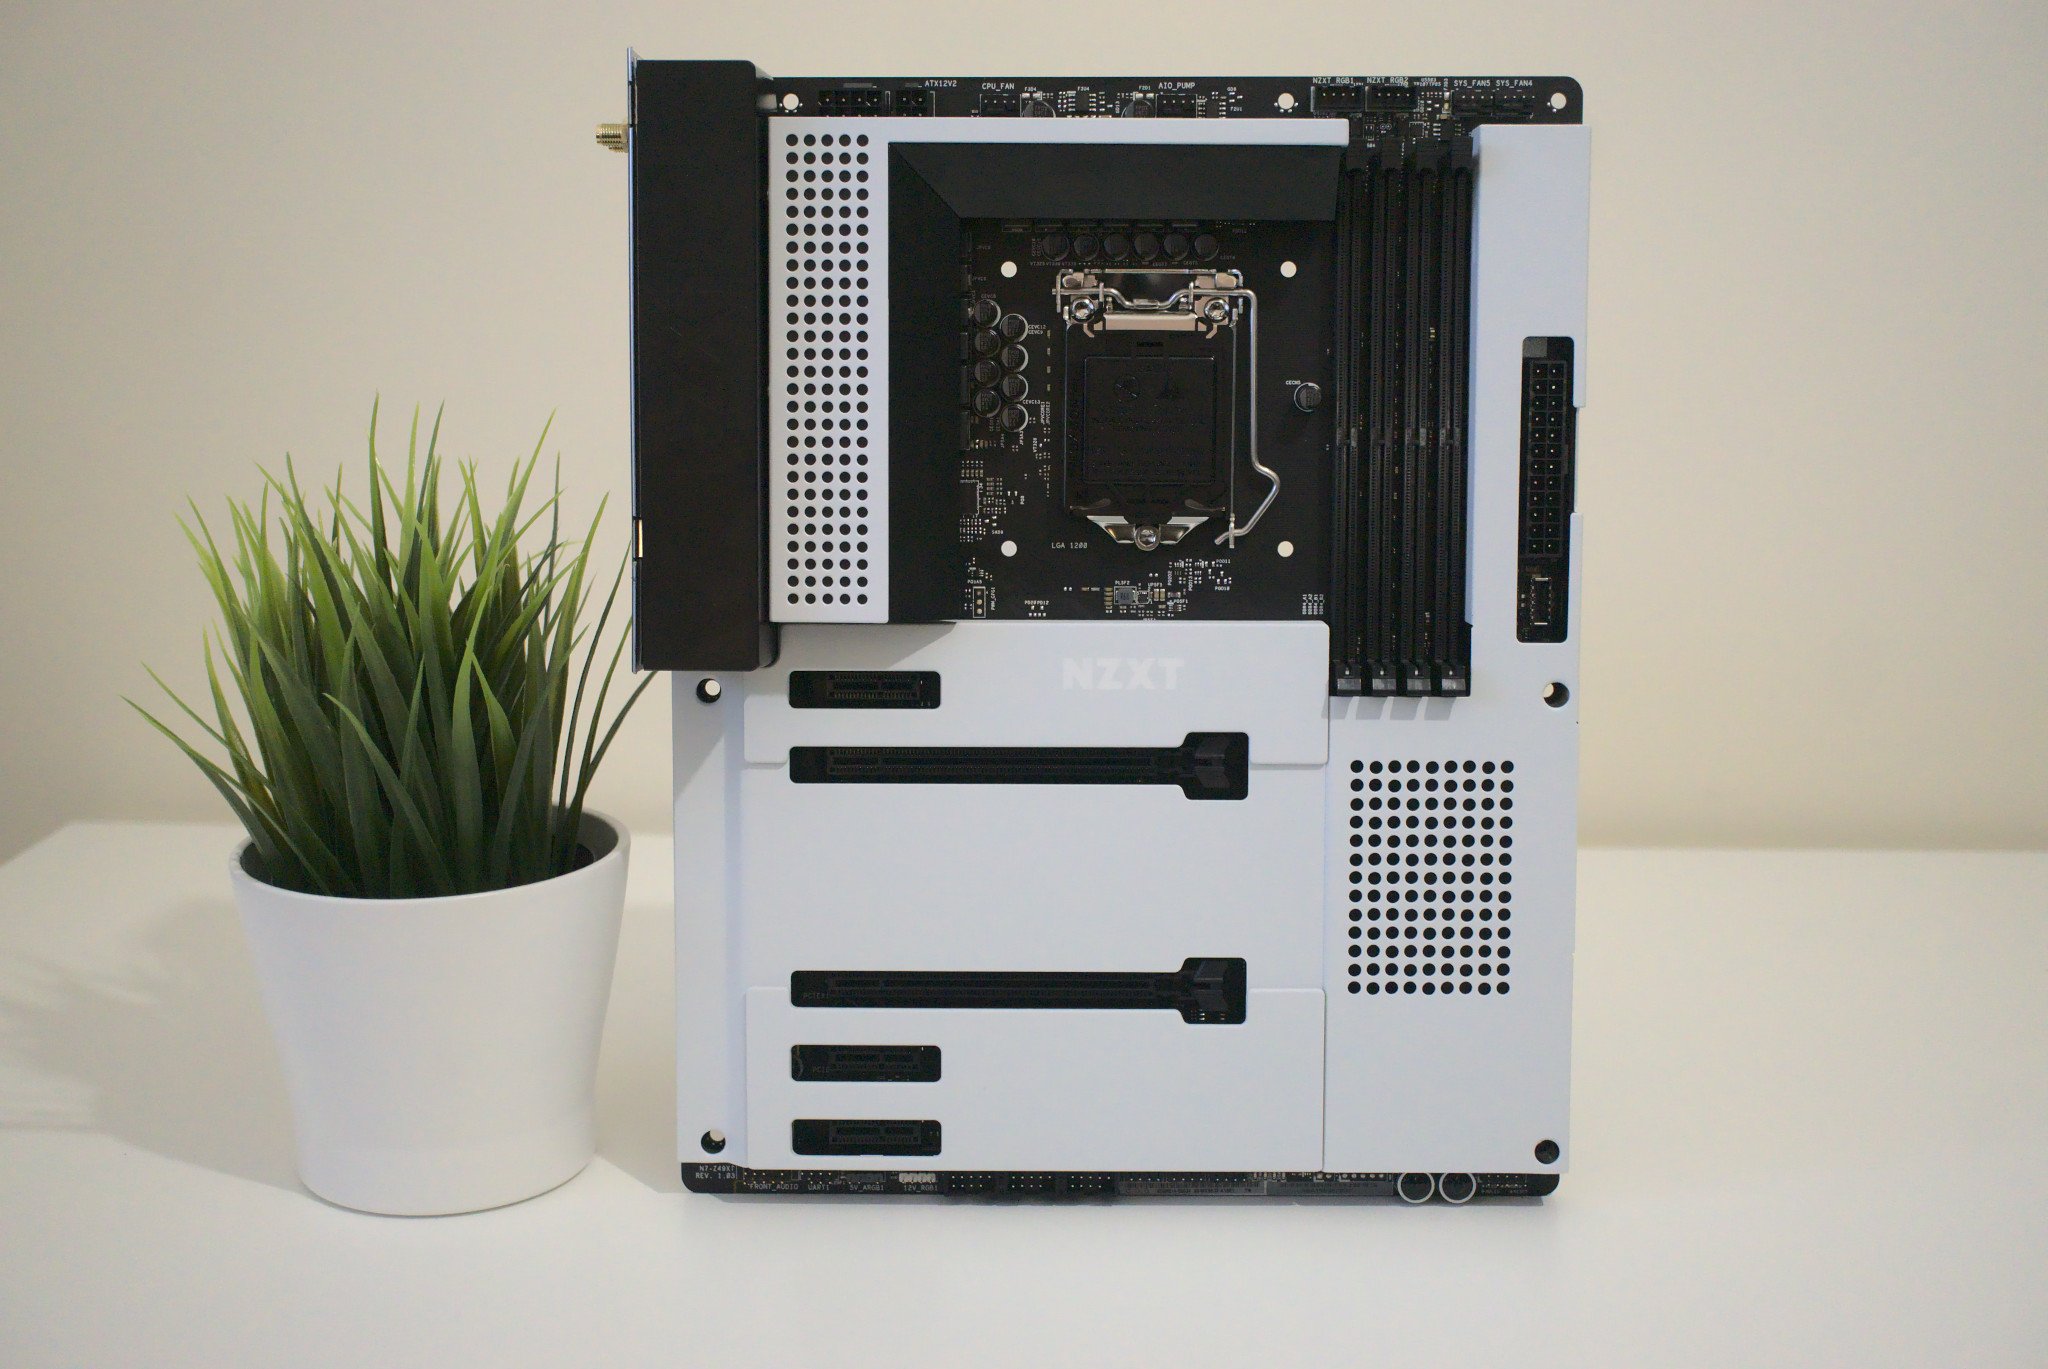 NZXT N7 Z490 review: By far the best-looking Intel motherboard